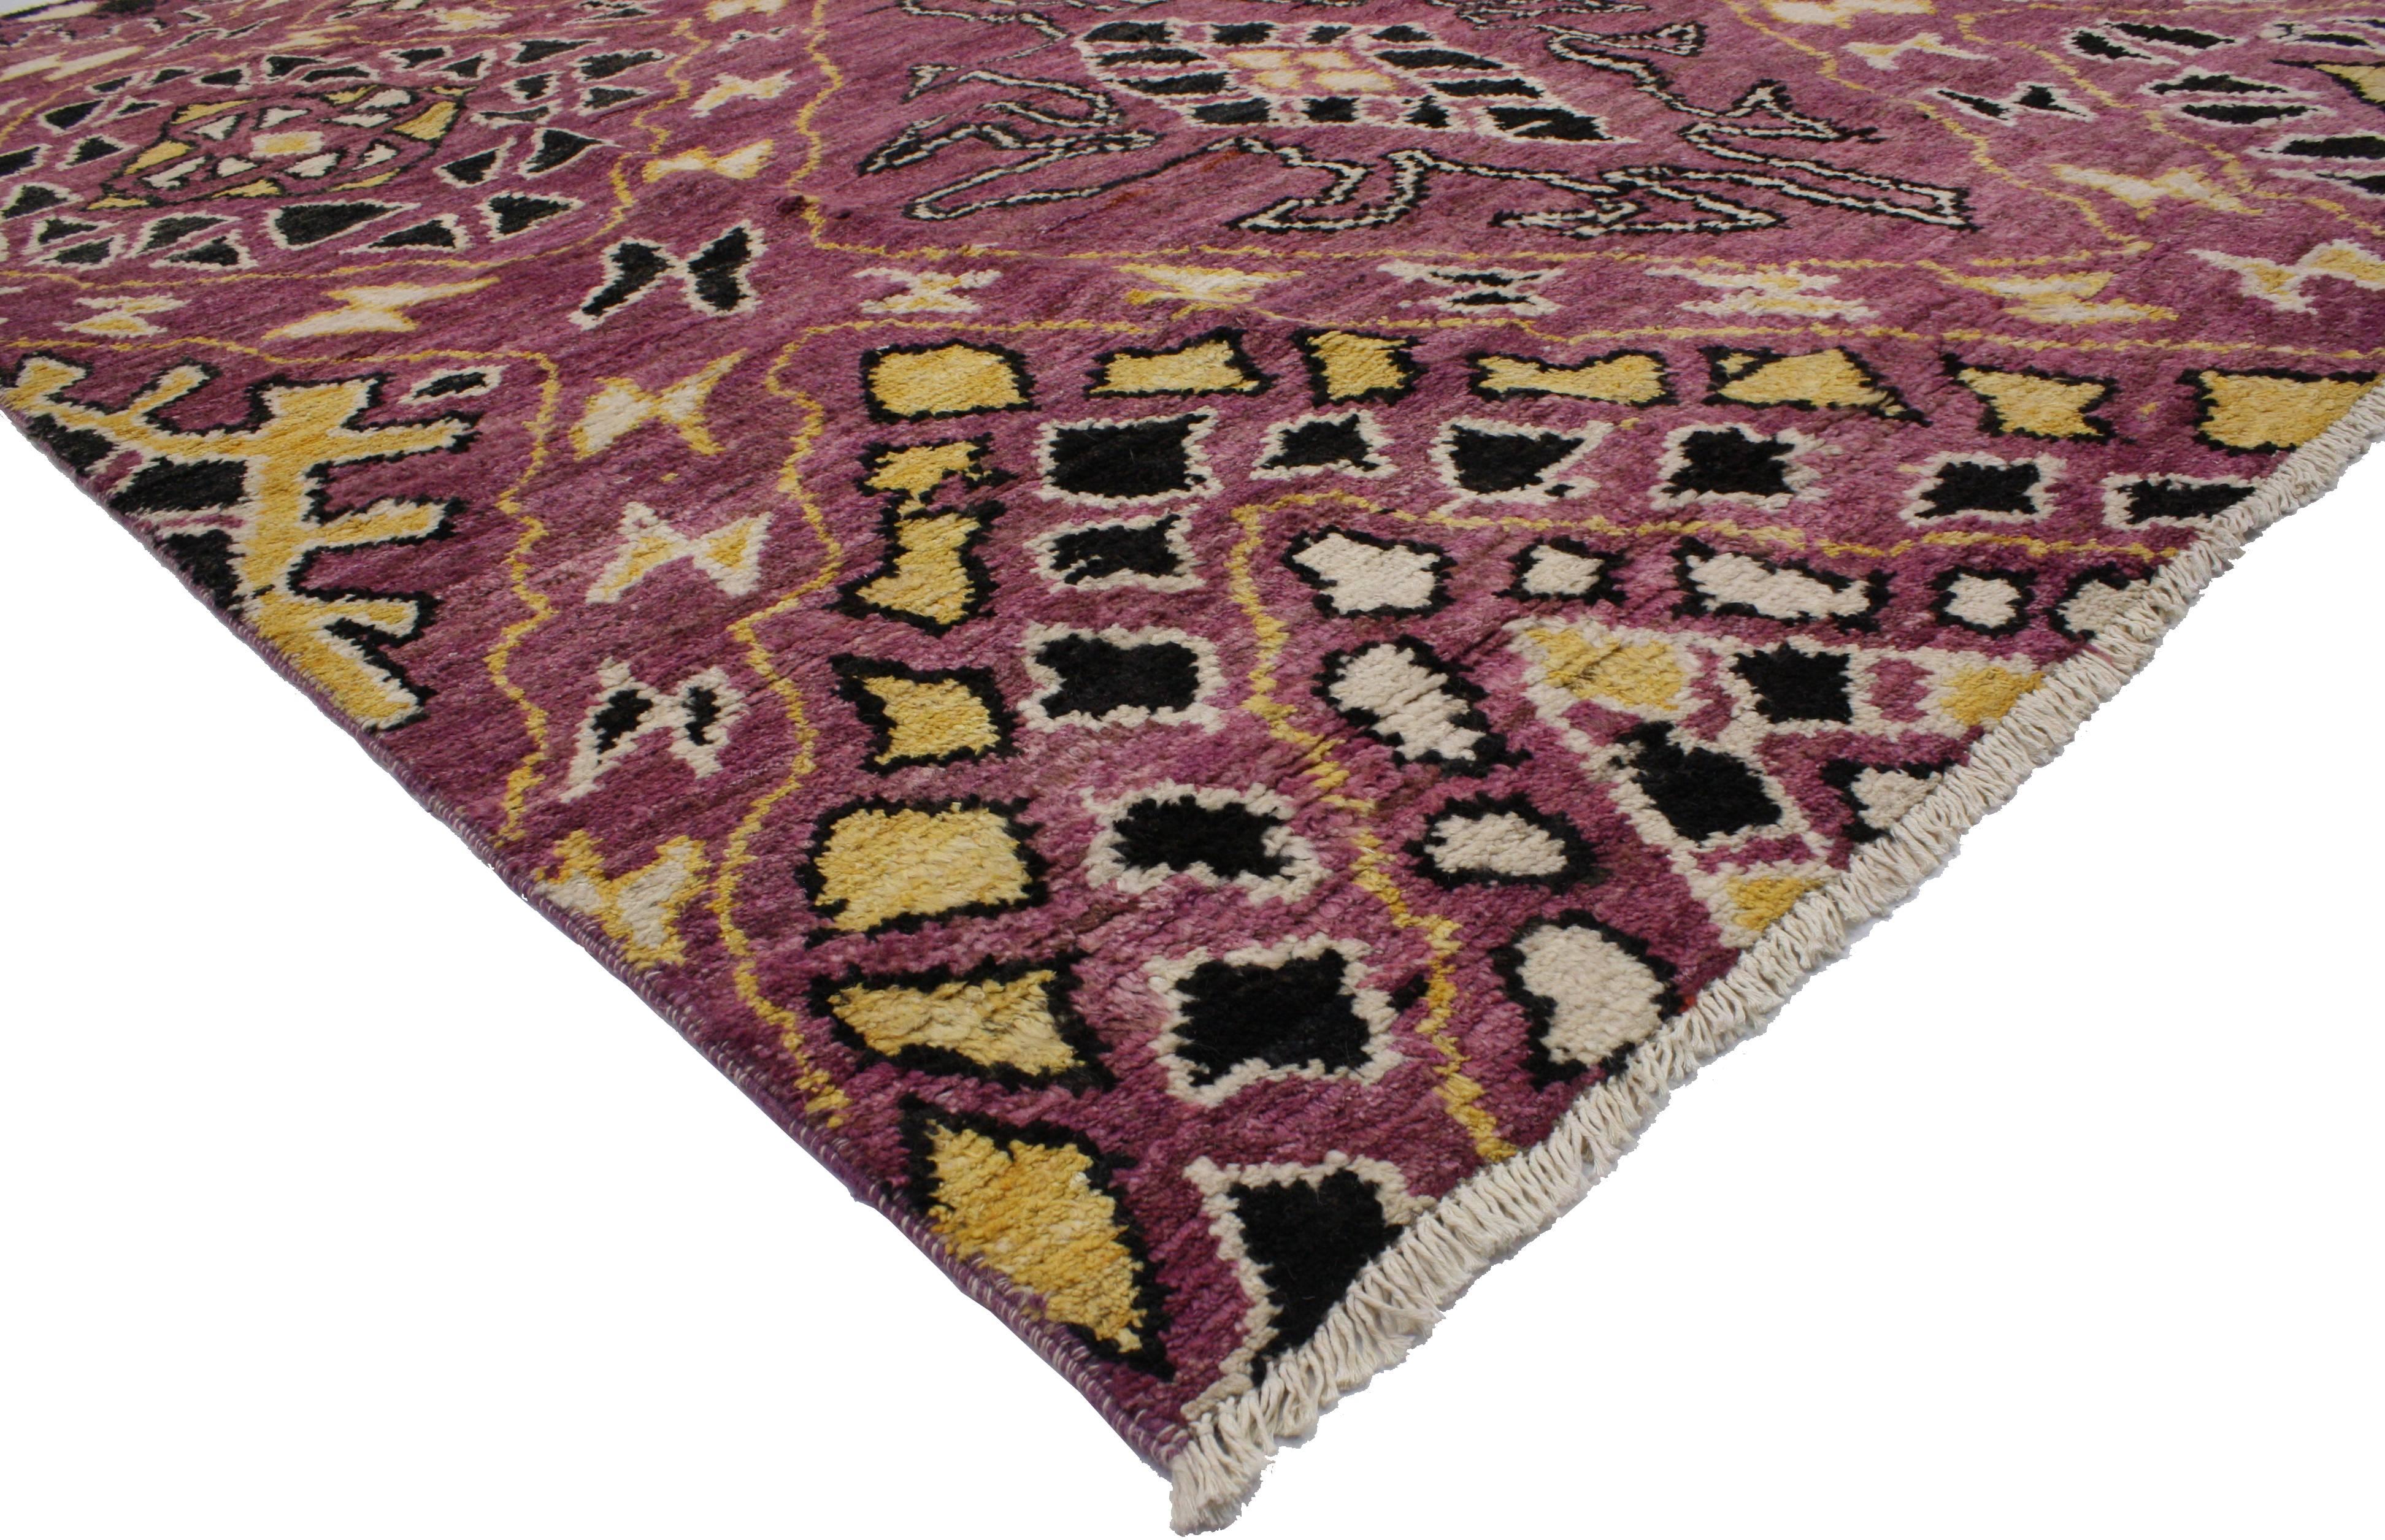 This contemporary Moroccan style rug is a one-of-a-kind piece. Featuring an energetic explosion of abstract lozenge symbols combined with a beautiful color palette consisting of plum, pale freesia yellow, ivory, black and brown will add instant